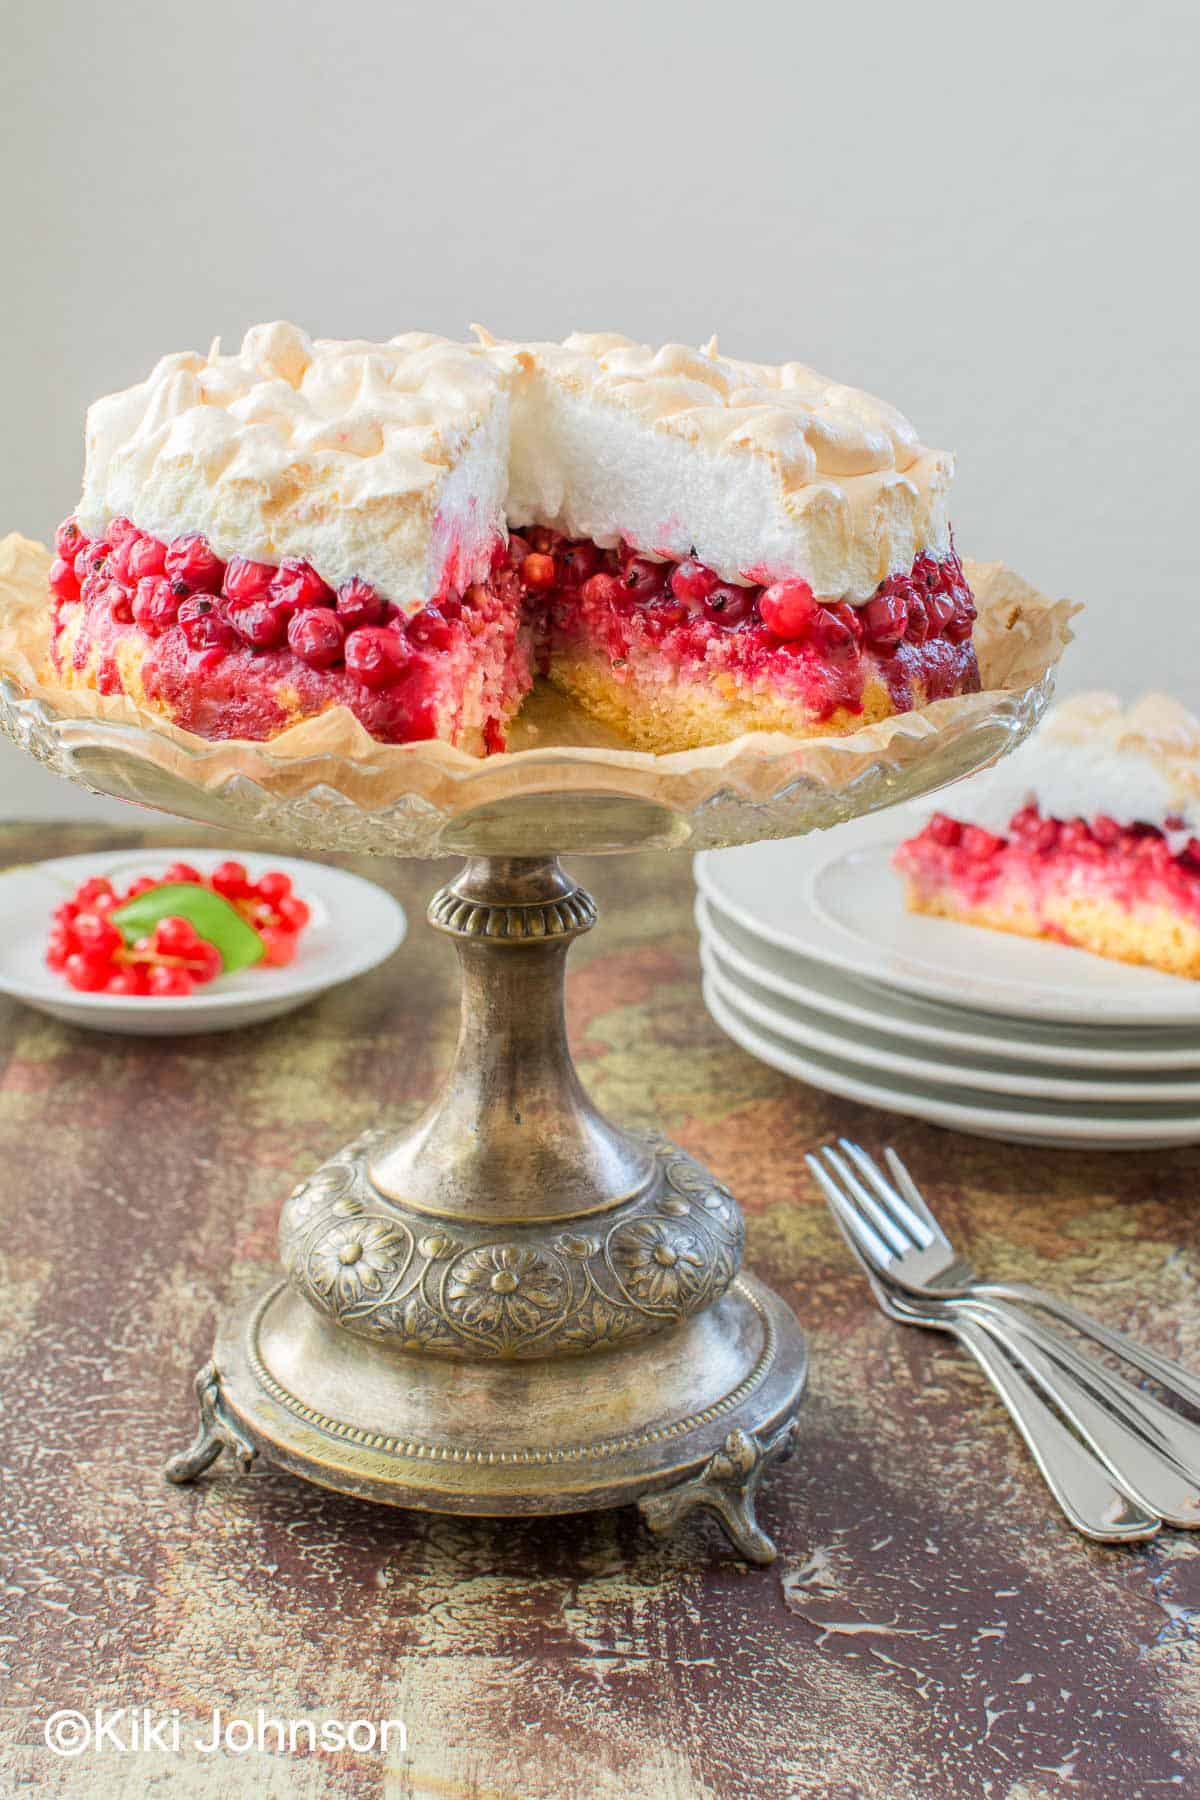 German fresh red currant meringue cake on a silver cake stand with one slice missing